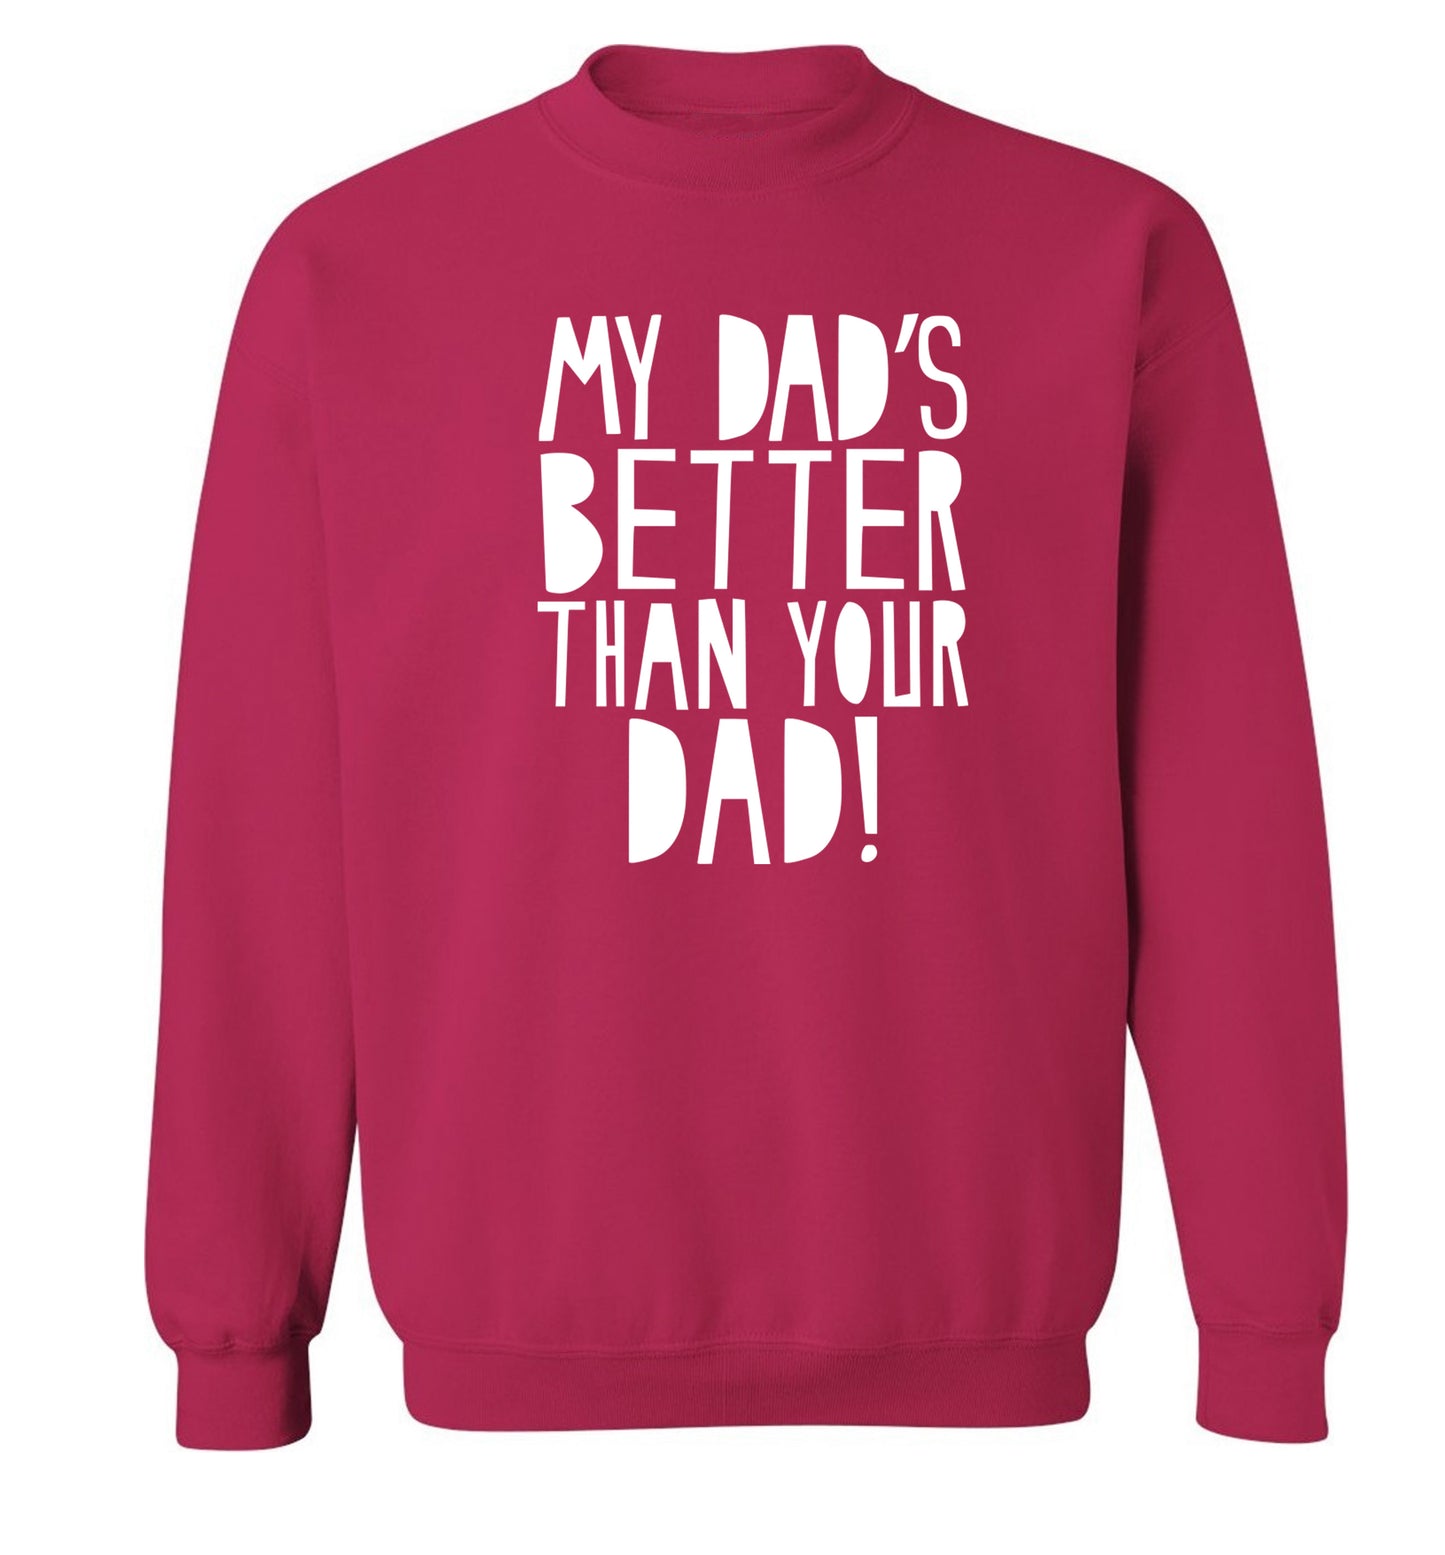 My dad's better than your dad Adult's unisex pink Sweater 2XL